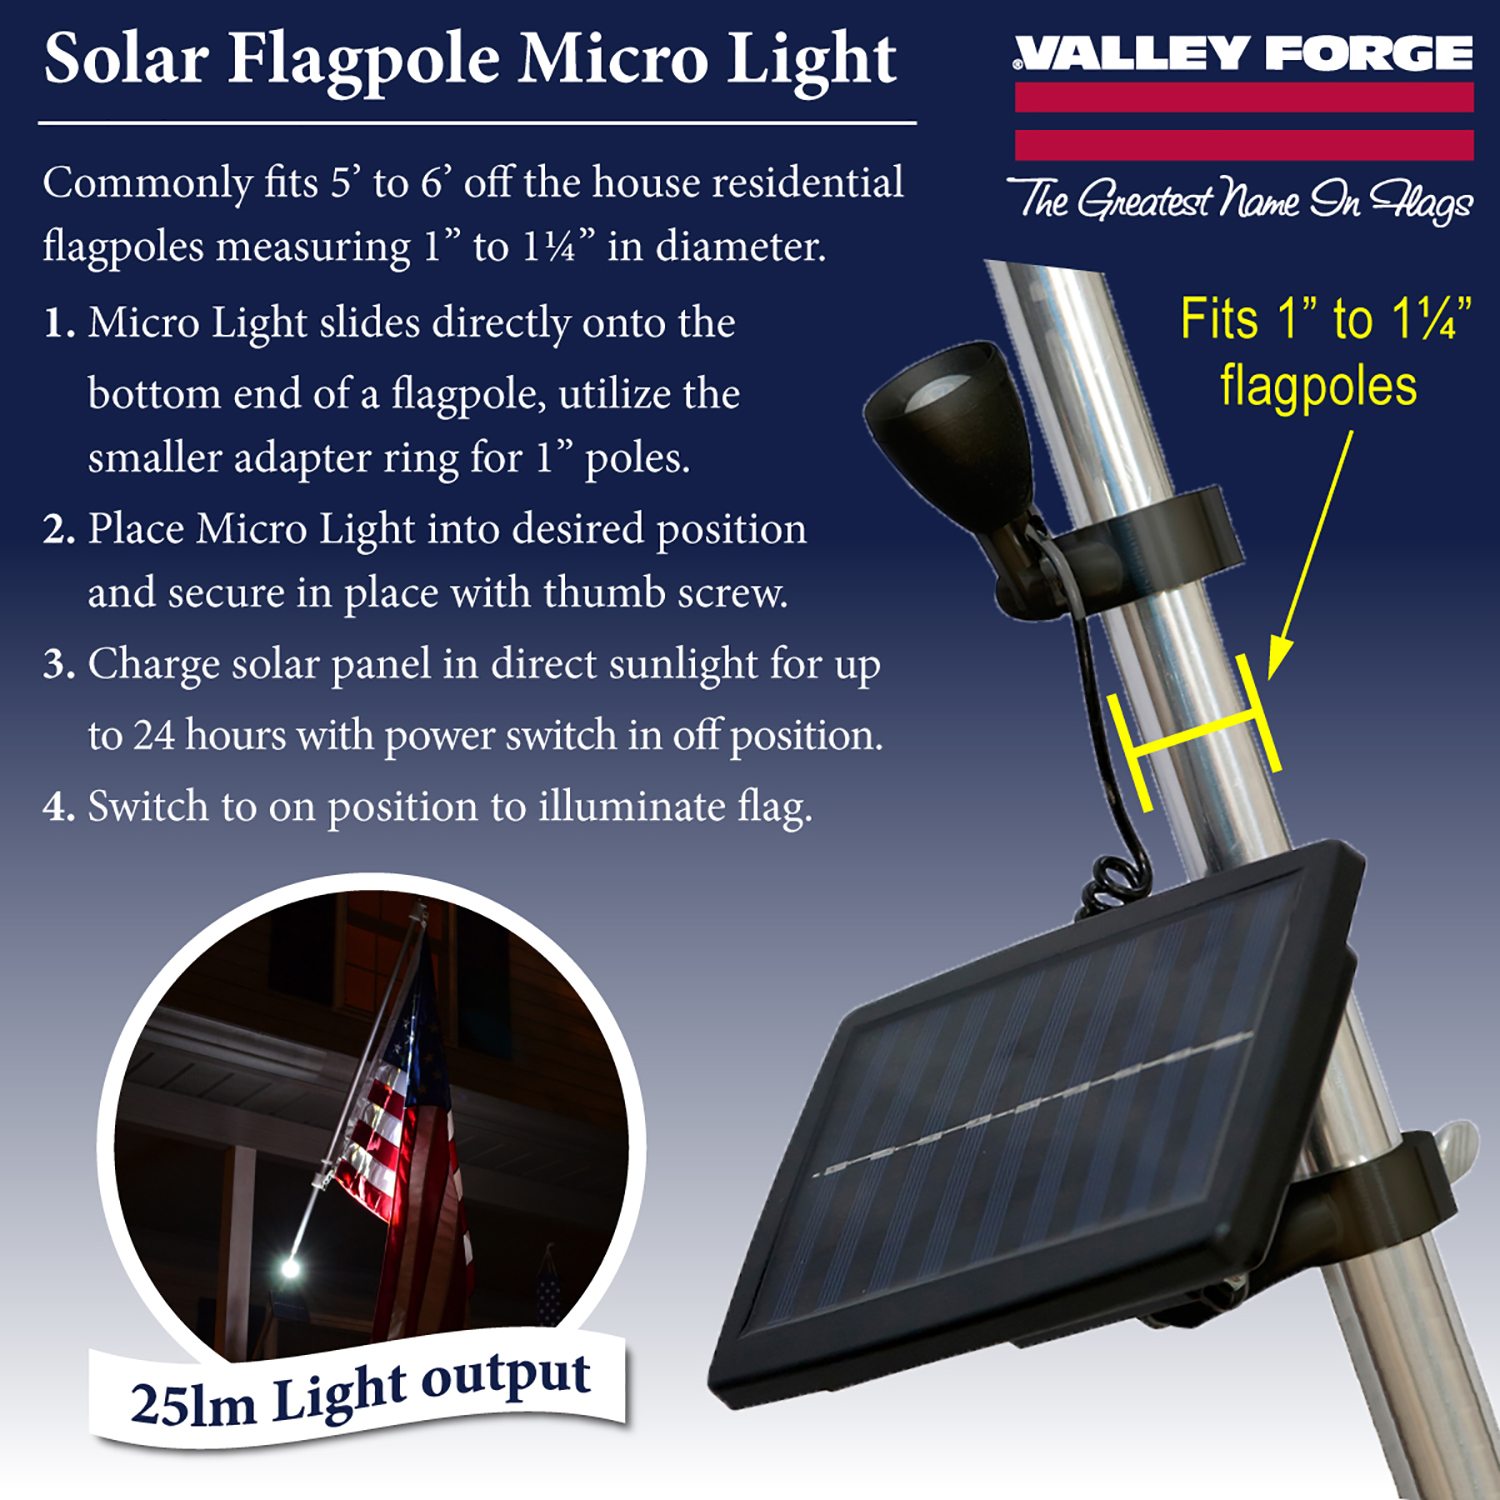 Plastic Solar Flagpole Light for Flags by Valley Forge, Compatible with 1" or 1.25" Flagpole - image 5 of 5